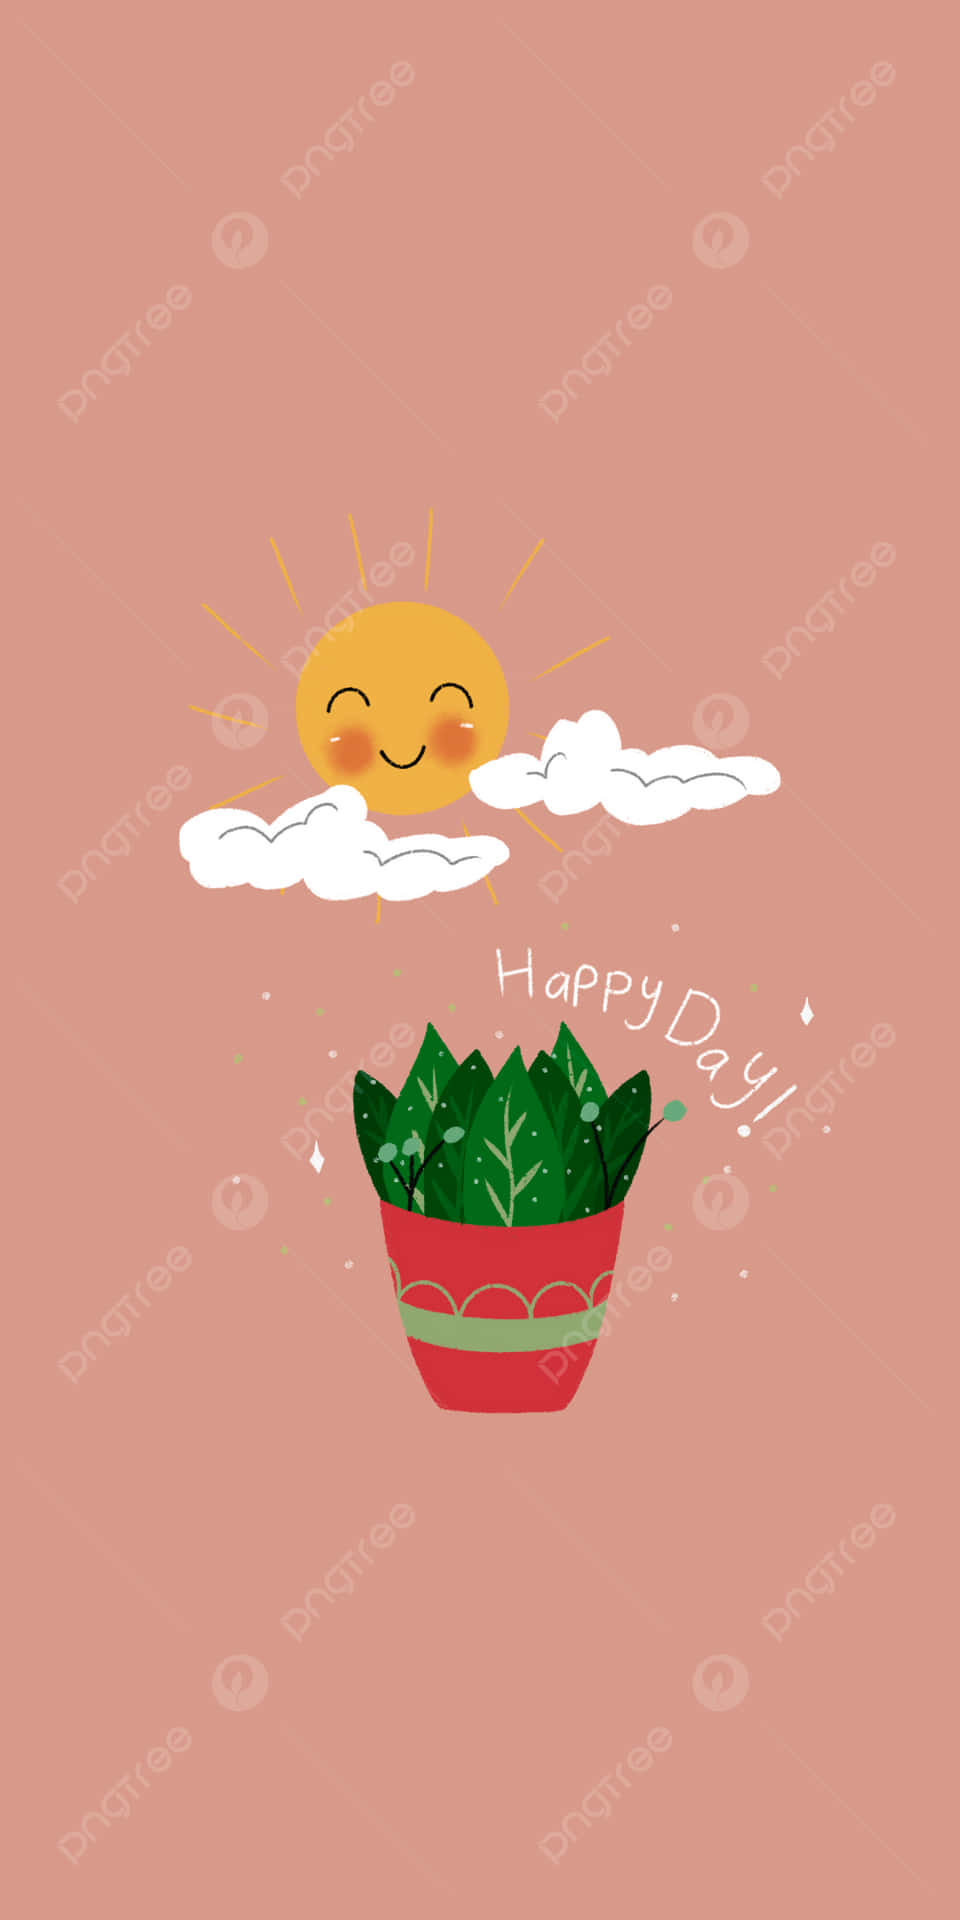 Happy Day - Svg Vector - Svg Vector Background